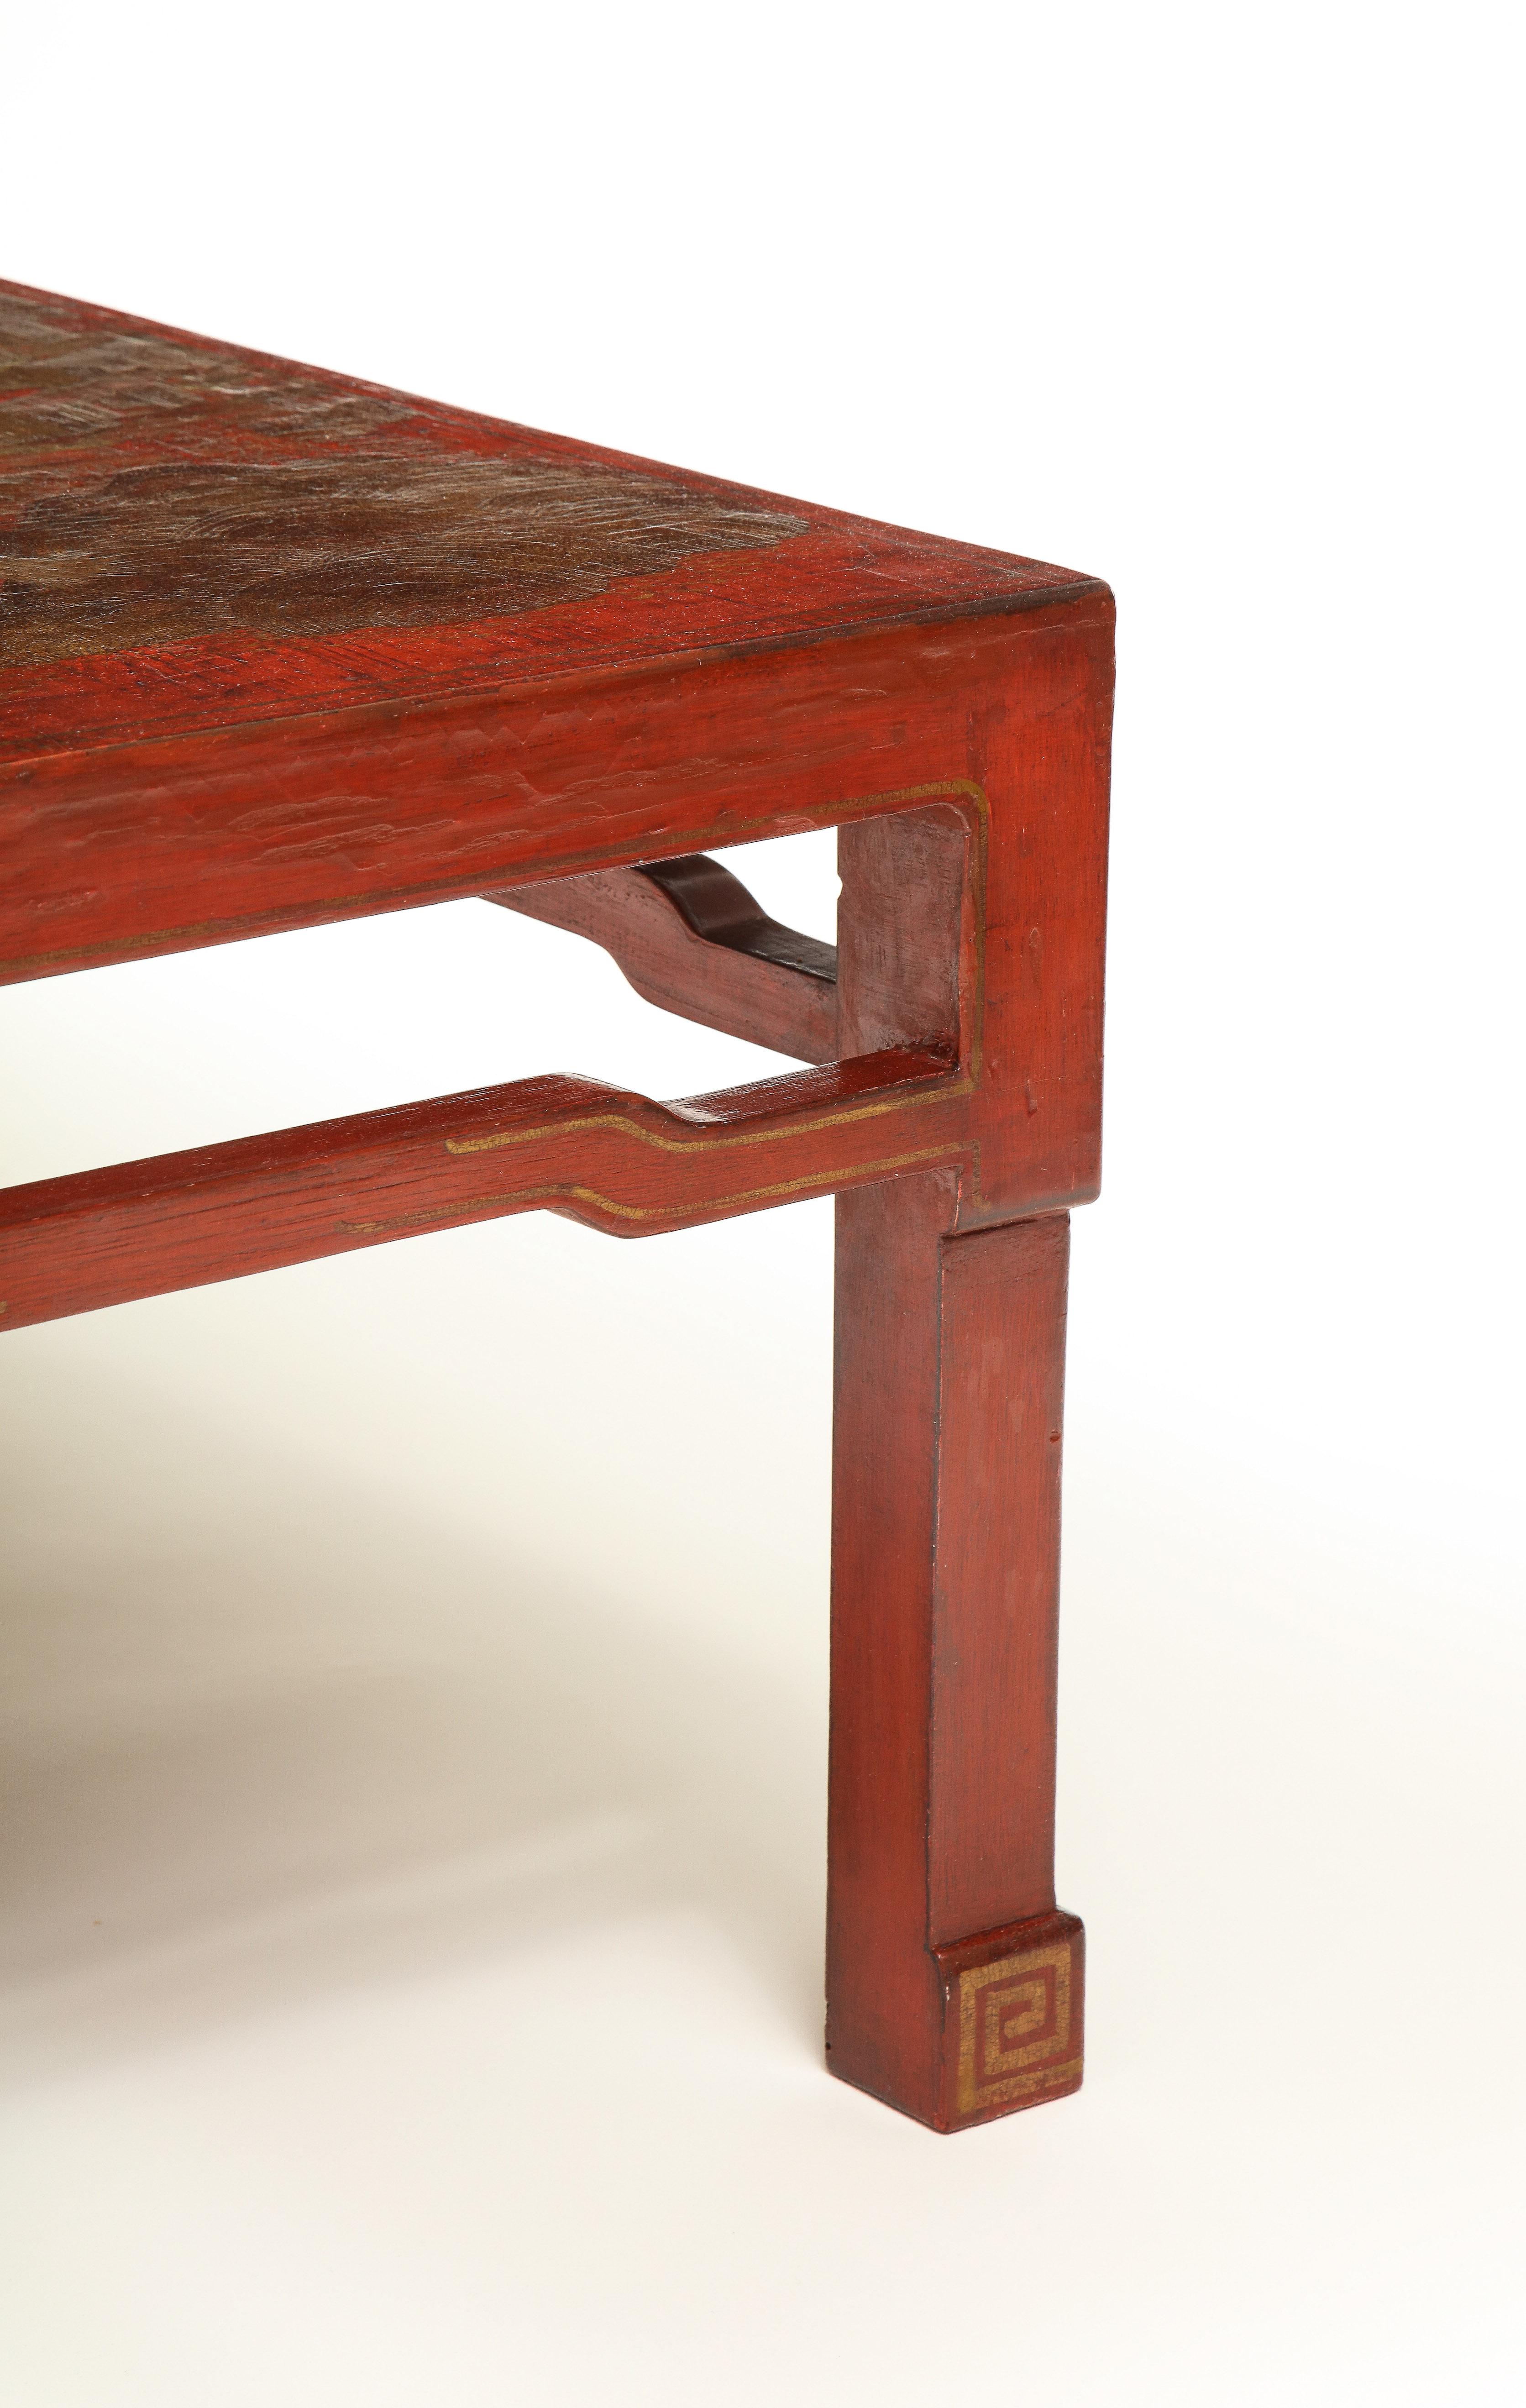 20th Century Scarlet Red Lacquered and Gilt Chinoiserie Low Table